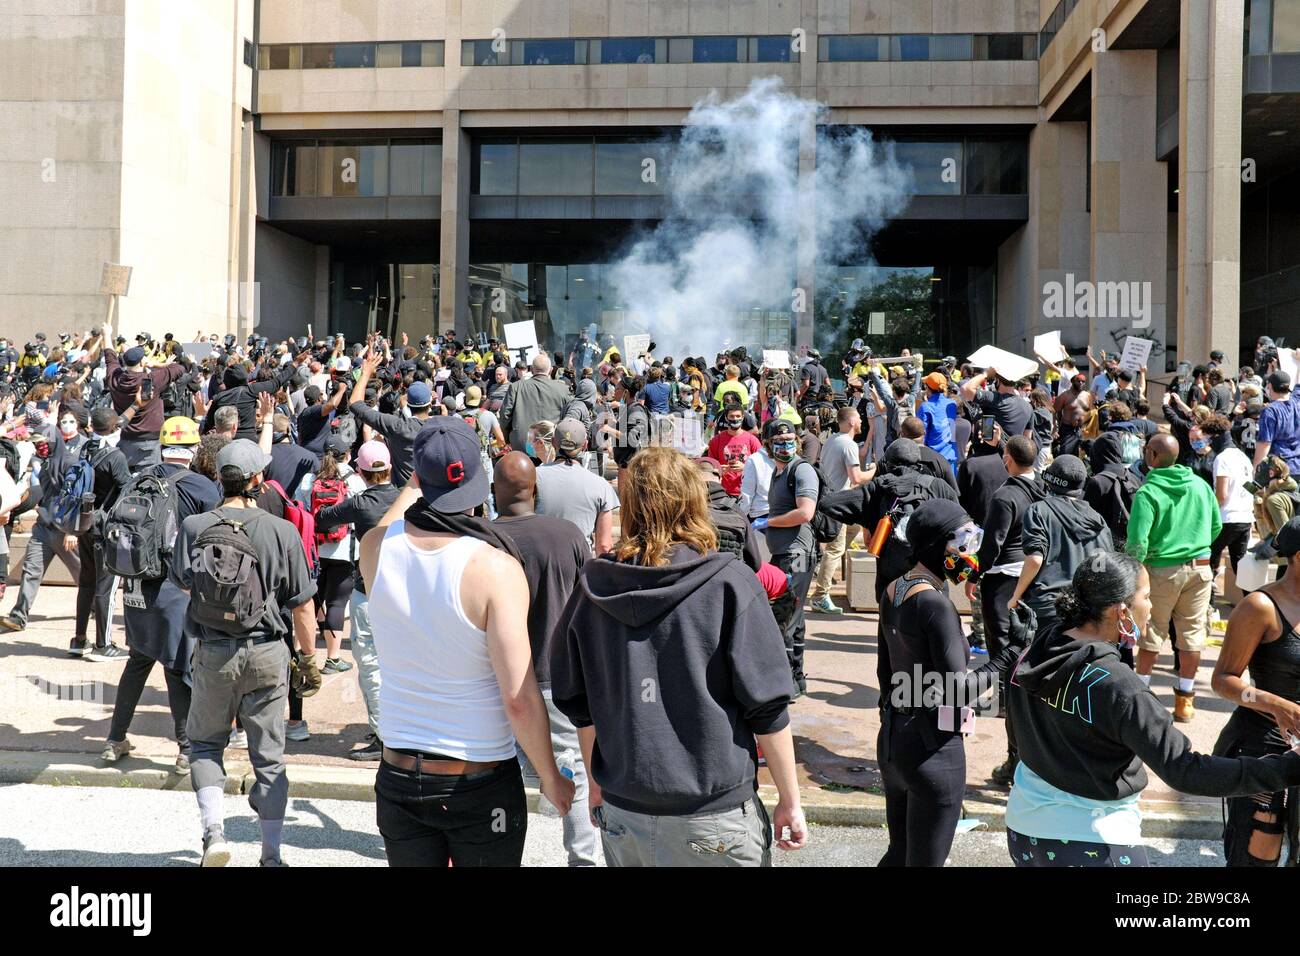 Thousands of protesters fill the area in front of the Justice Center in Cleveland, Ohio, USA during a demonstration against police brutality. The death of George Floyd at the hands of the Minneapolis police led to the protest in Cleveland as well as protests throughout the United States.  Tear gas can be seen rising outside the entrance to the Justice Center. Stock Photo